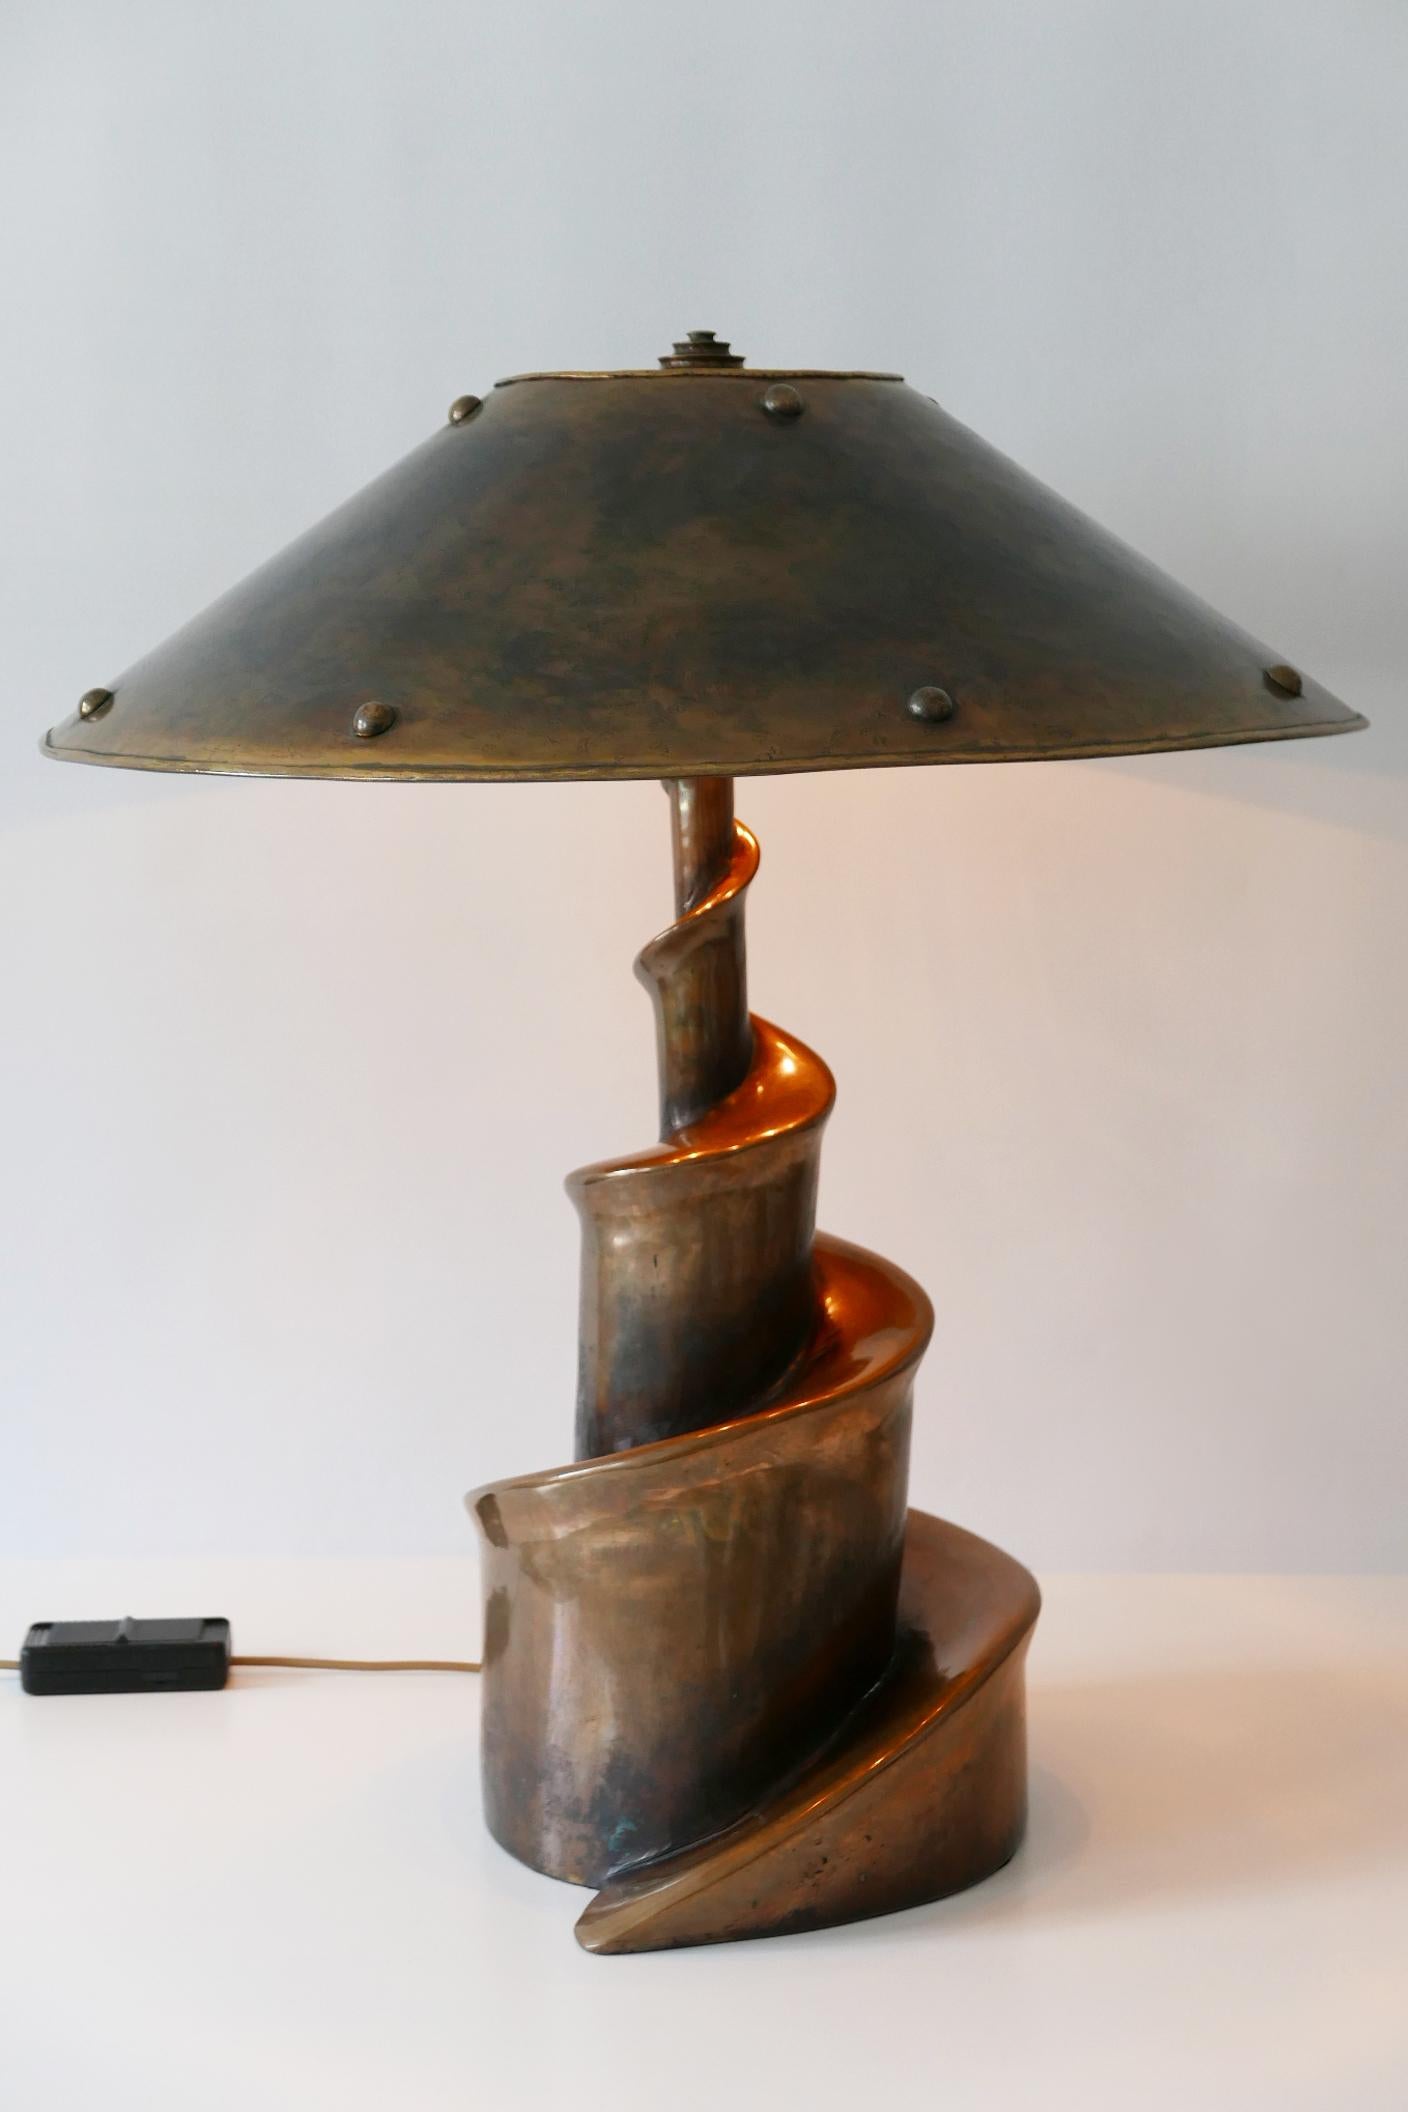 Gorgeous, exceptional Brutalist bronze table lamp or floor light. Probably a custom made unique piece. Made in 1980s, Munich, Germany.

Executed in cast bronze and brass, the lamp comes with 3 x E27 / E26 Edison screw fit bulb sockets, is wired, in